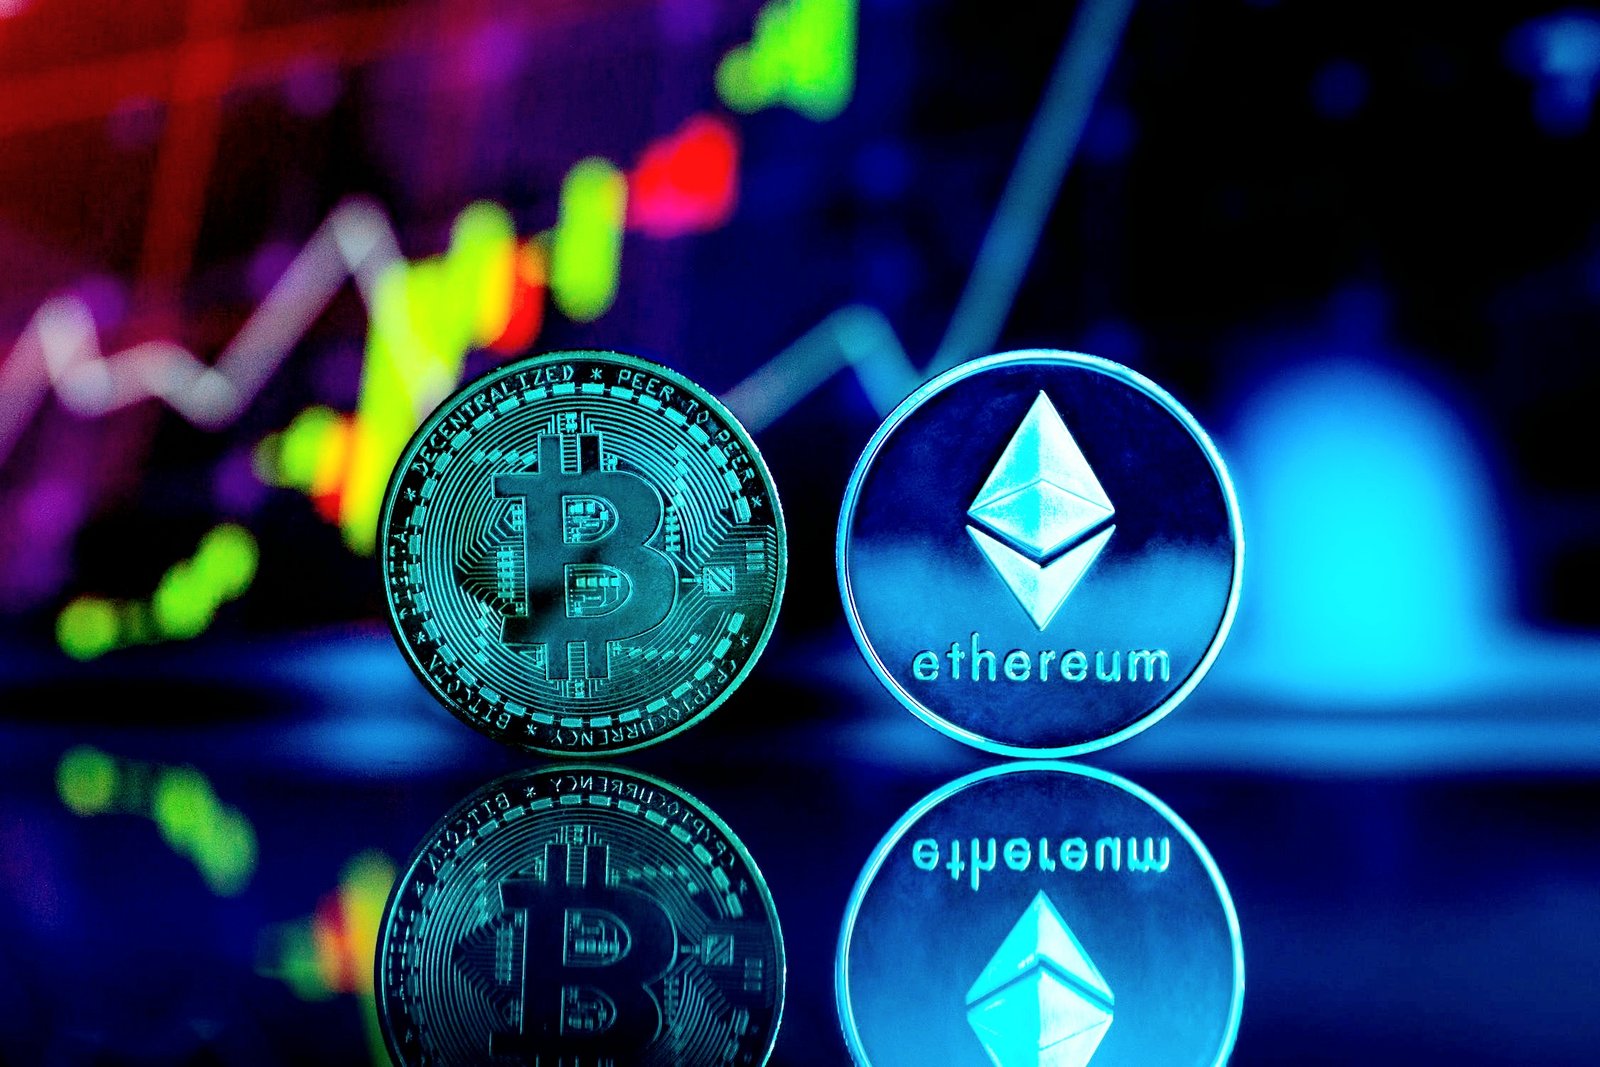 10 ethereum to bitcoin